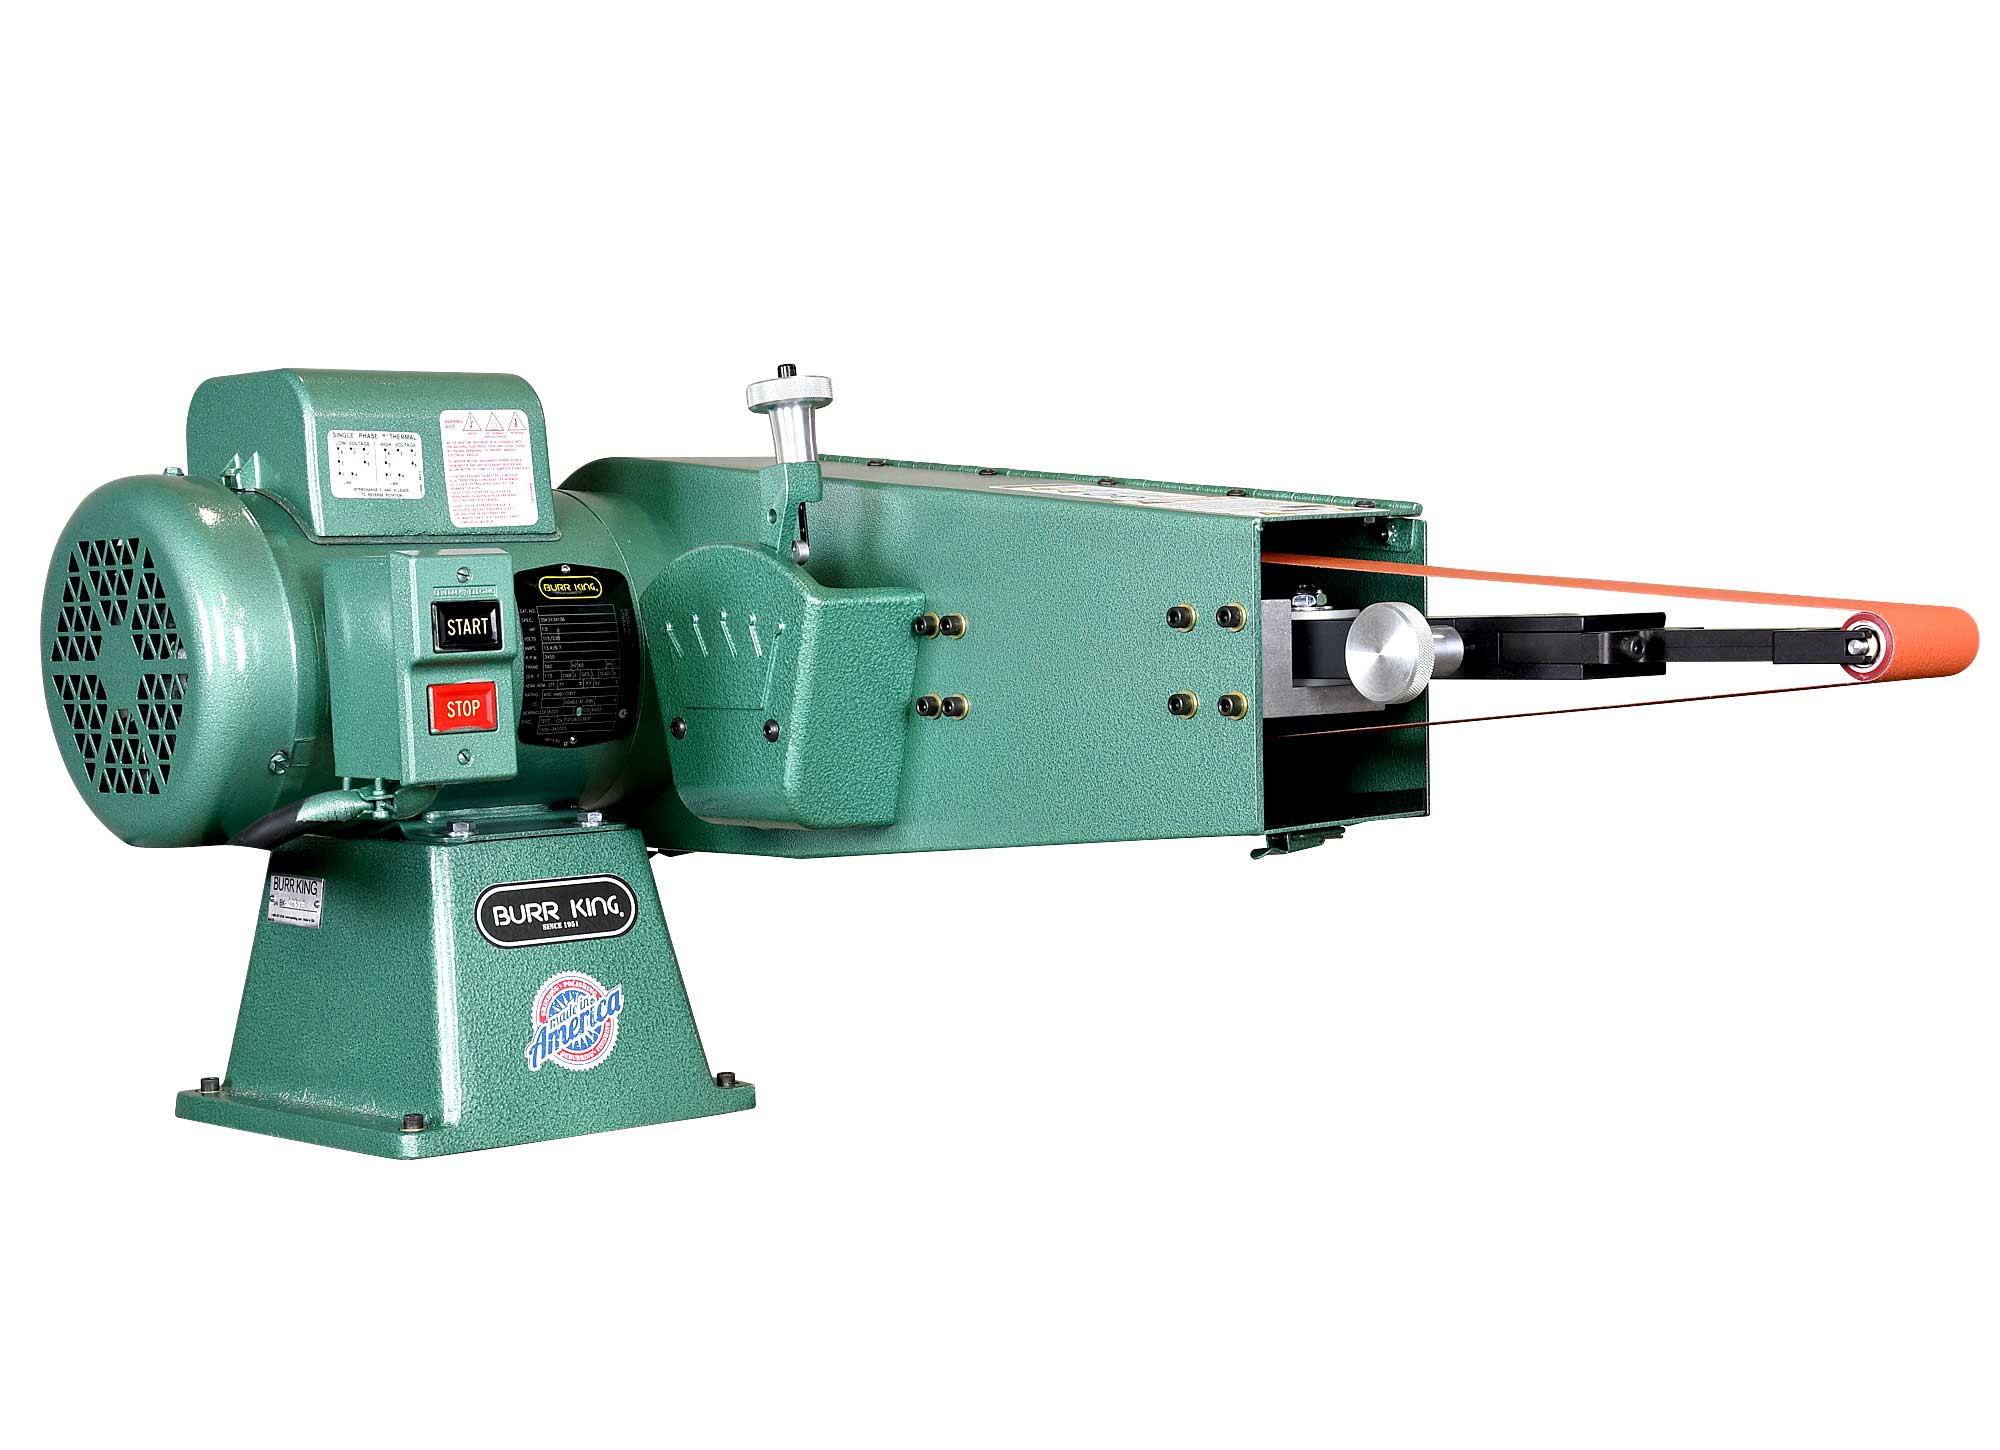 16300M -  Manual tension fixed speed M720 probe grinder